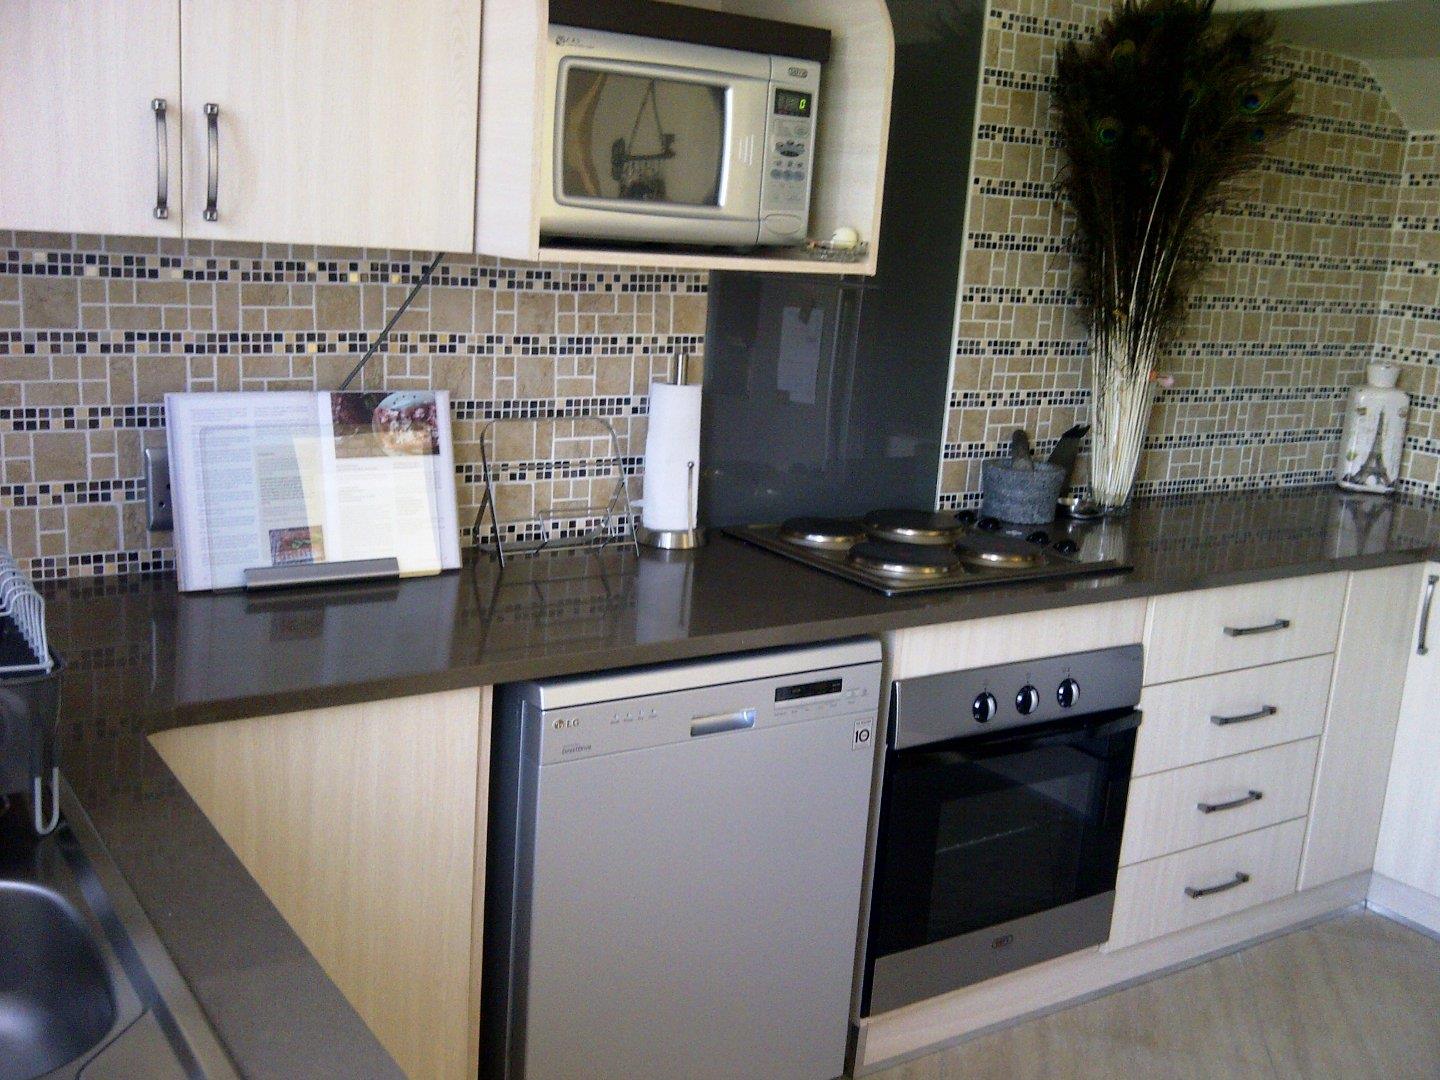 2 Bedroom Apartment / flat to rent in Potchefstroom Central